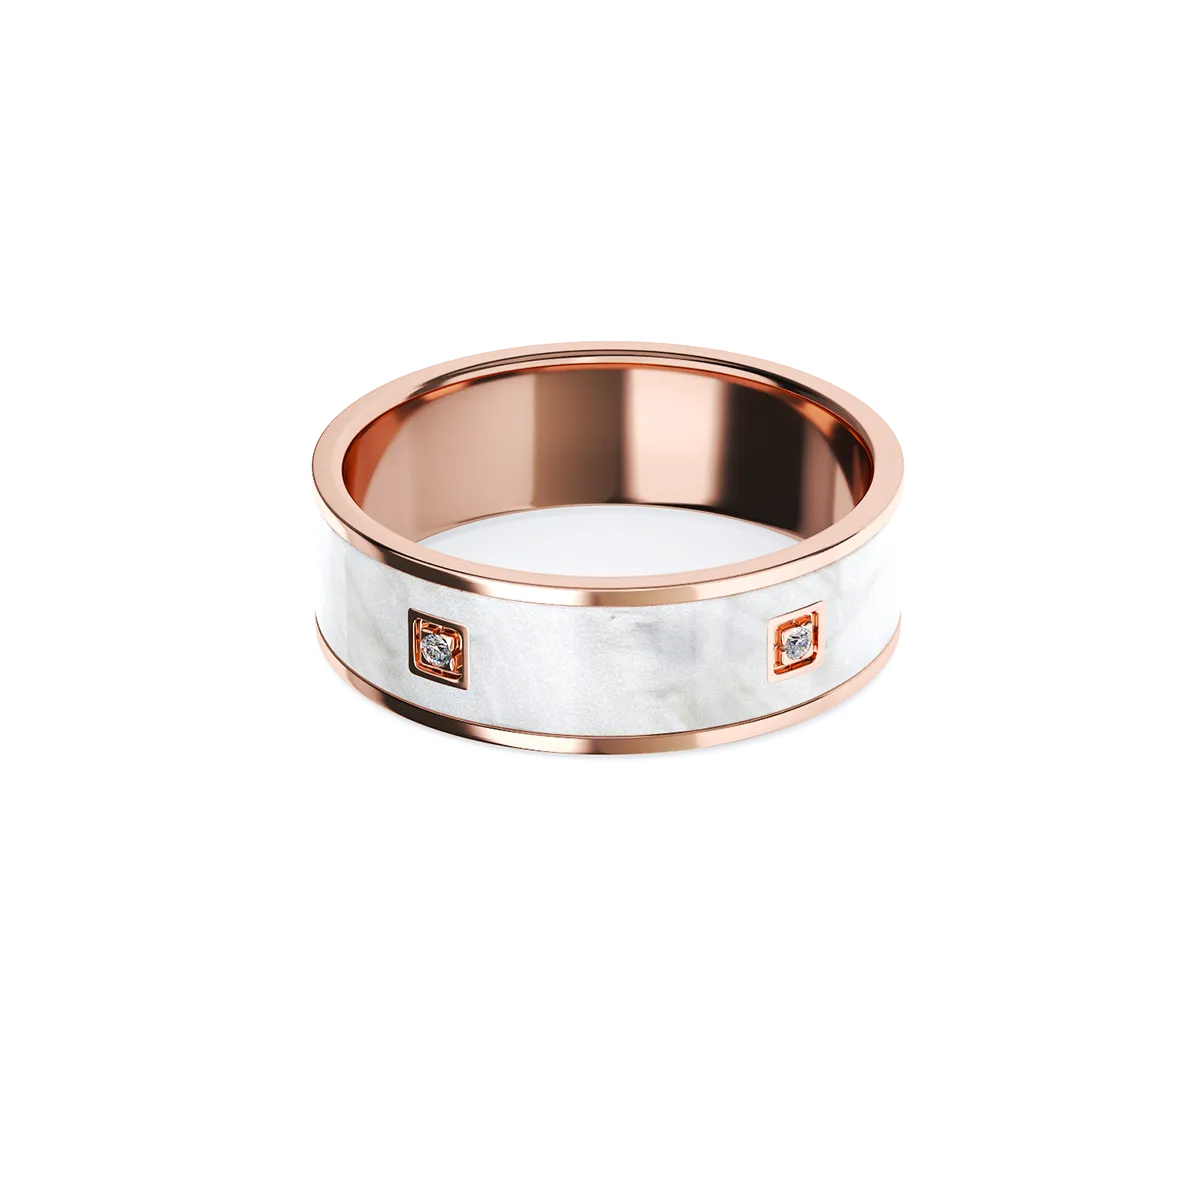 FLAIR gold and ceramic wedding ring